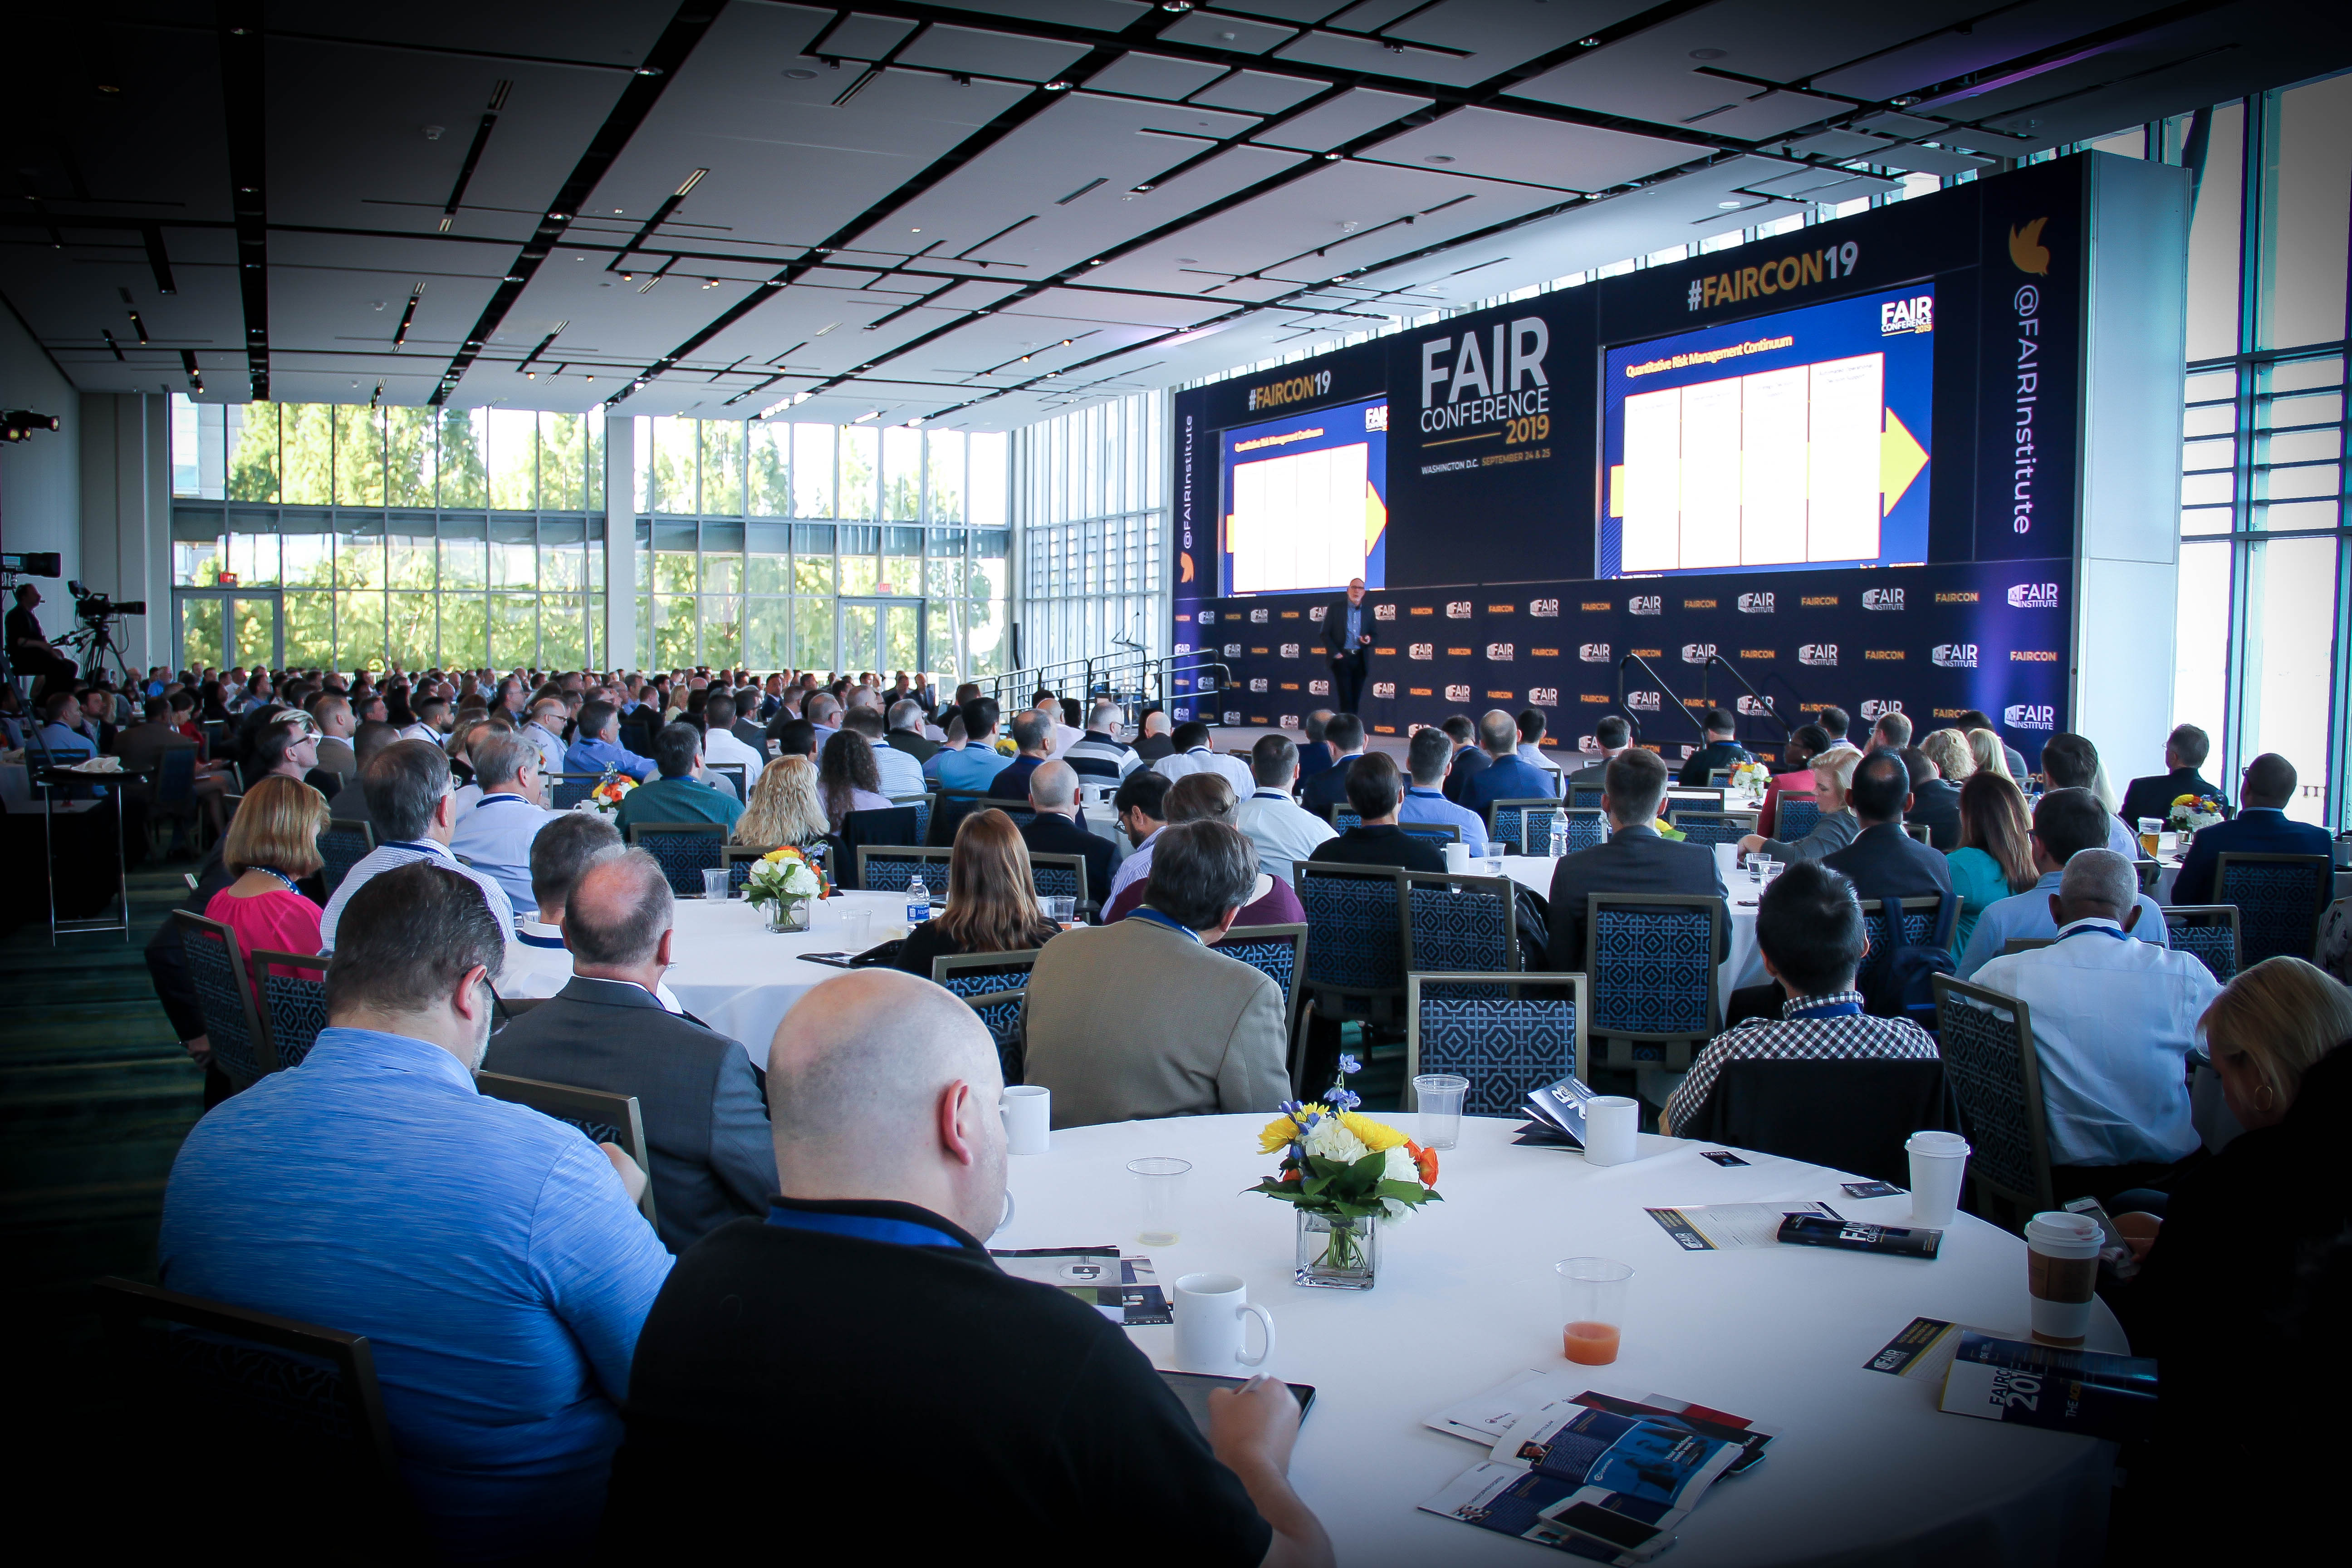 NIST CSF Adds FAIR™, Videos from FAIR Conference 2019, and More Top 5 Topics of Our Blog in 2019